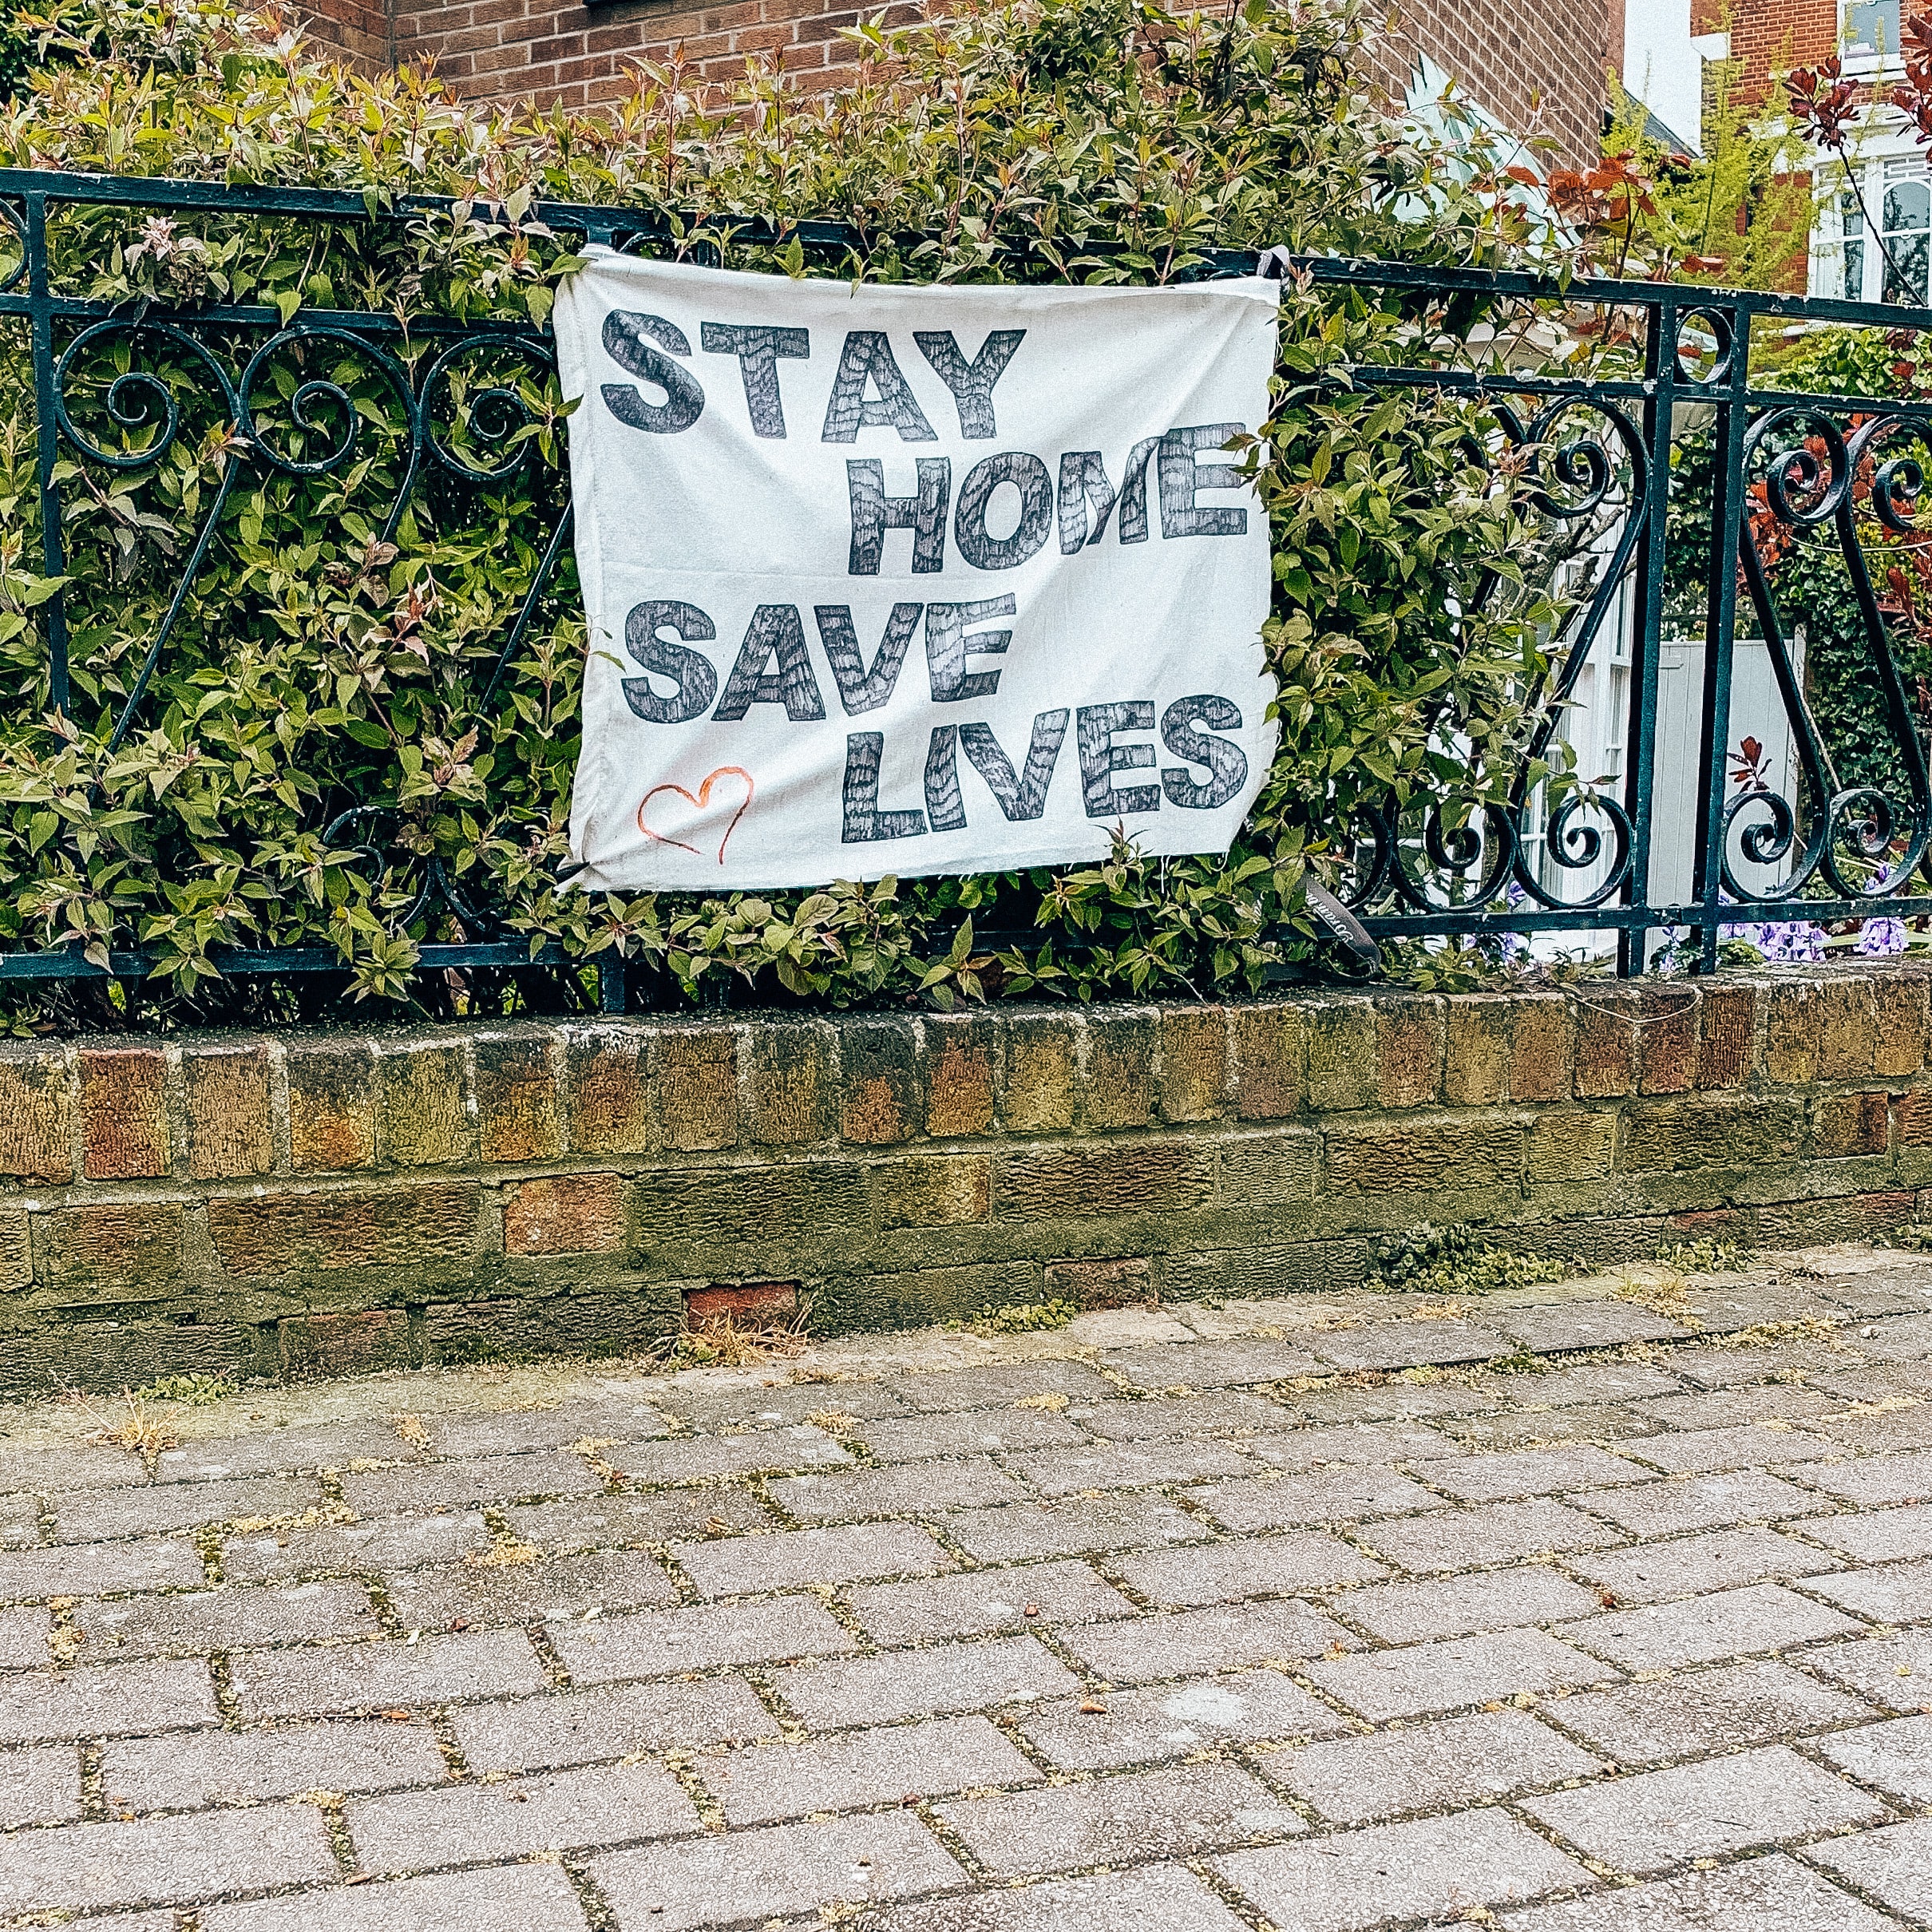 A sign attached to black railing in front of some green shrubbery reads "stay home, save lives" in capital letters in black lettering against a white background. 